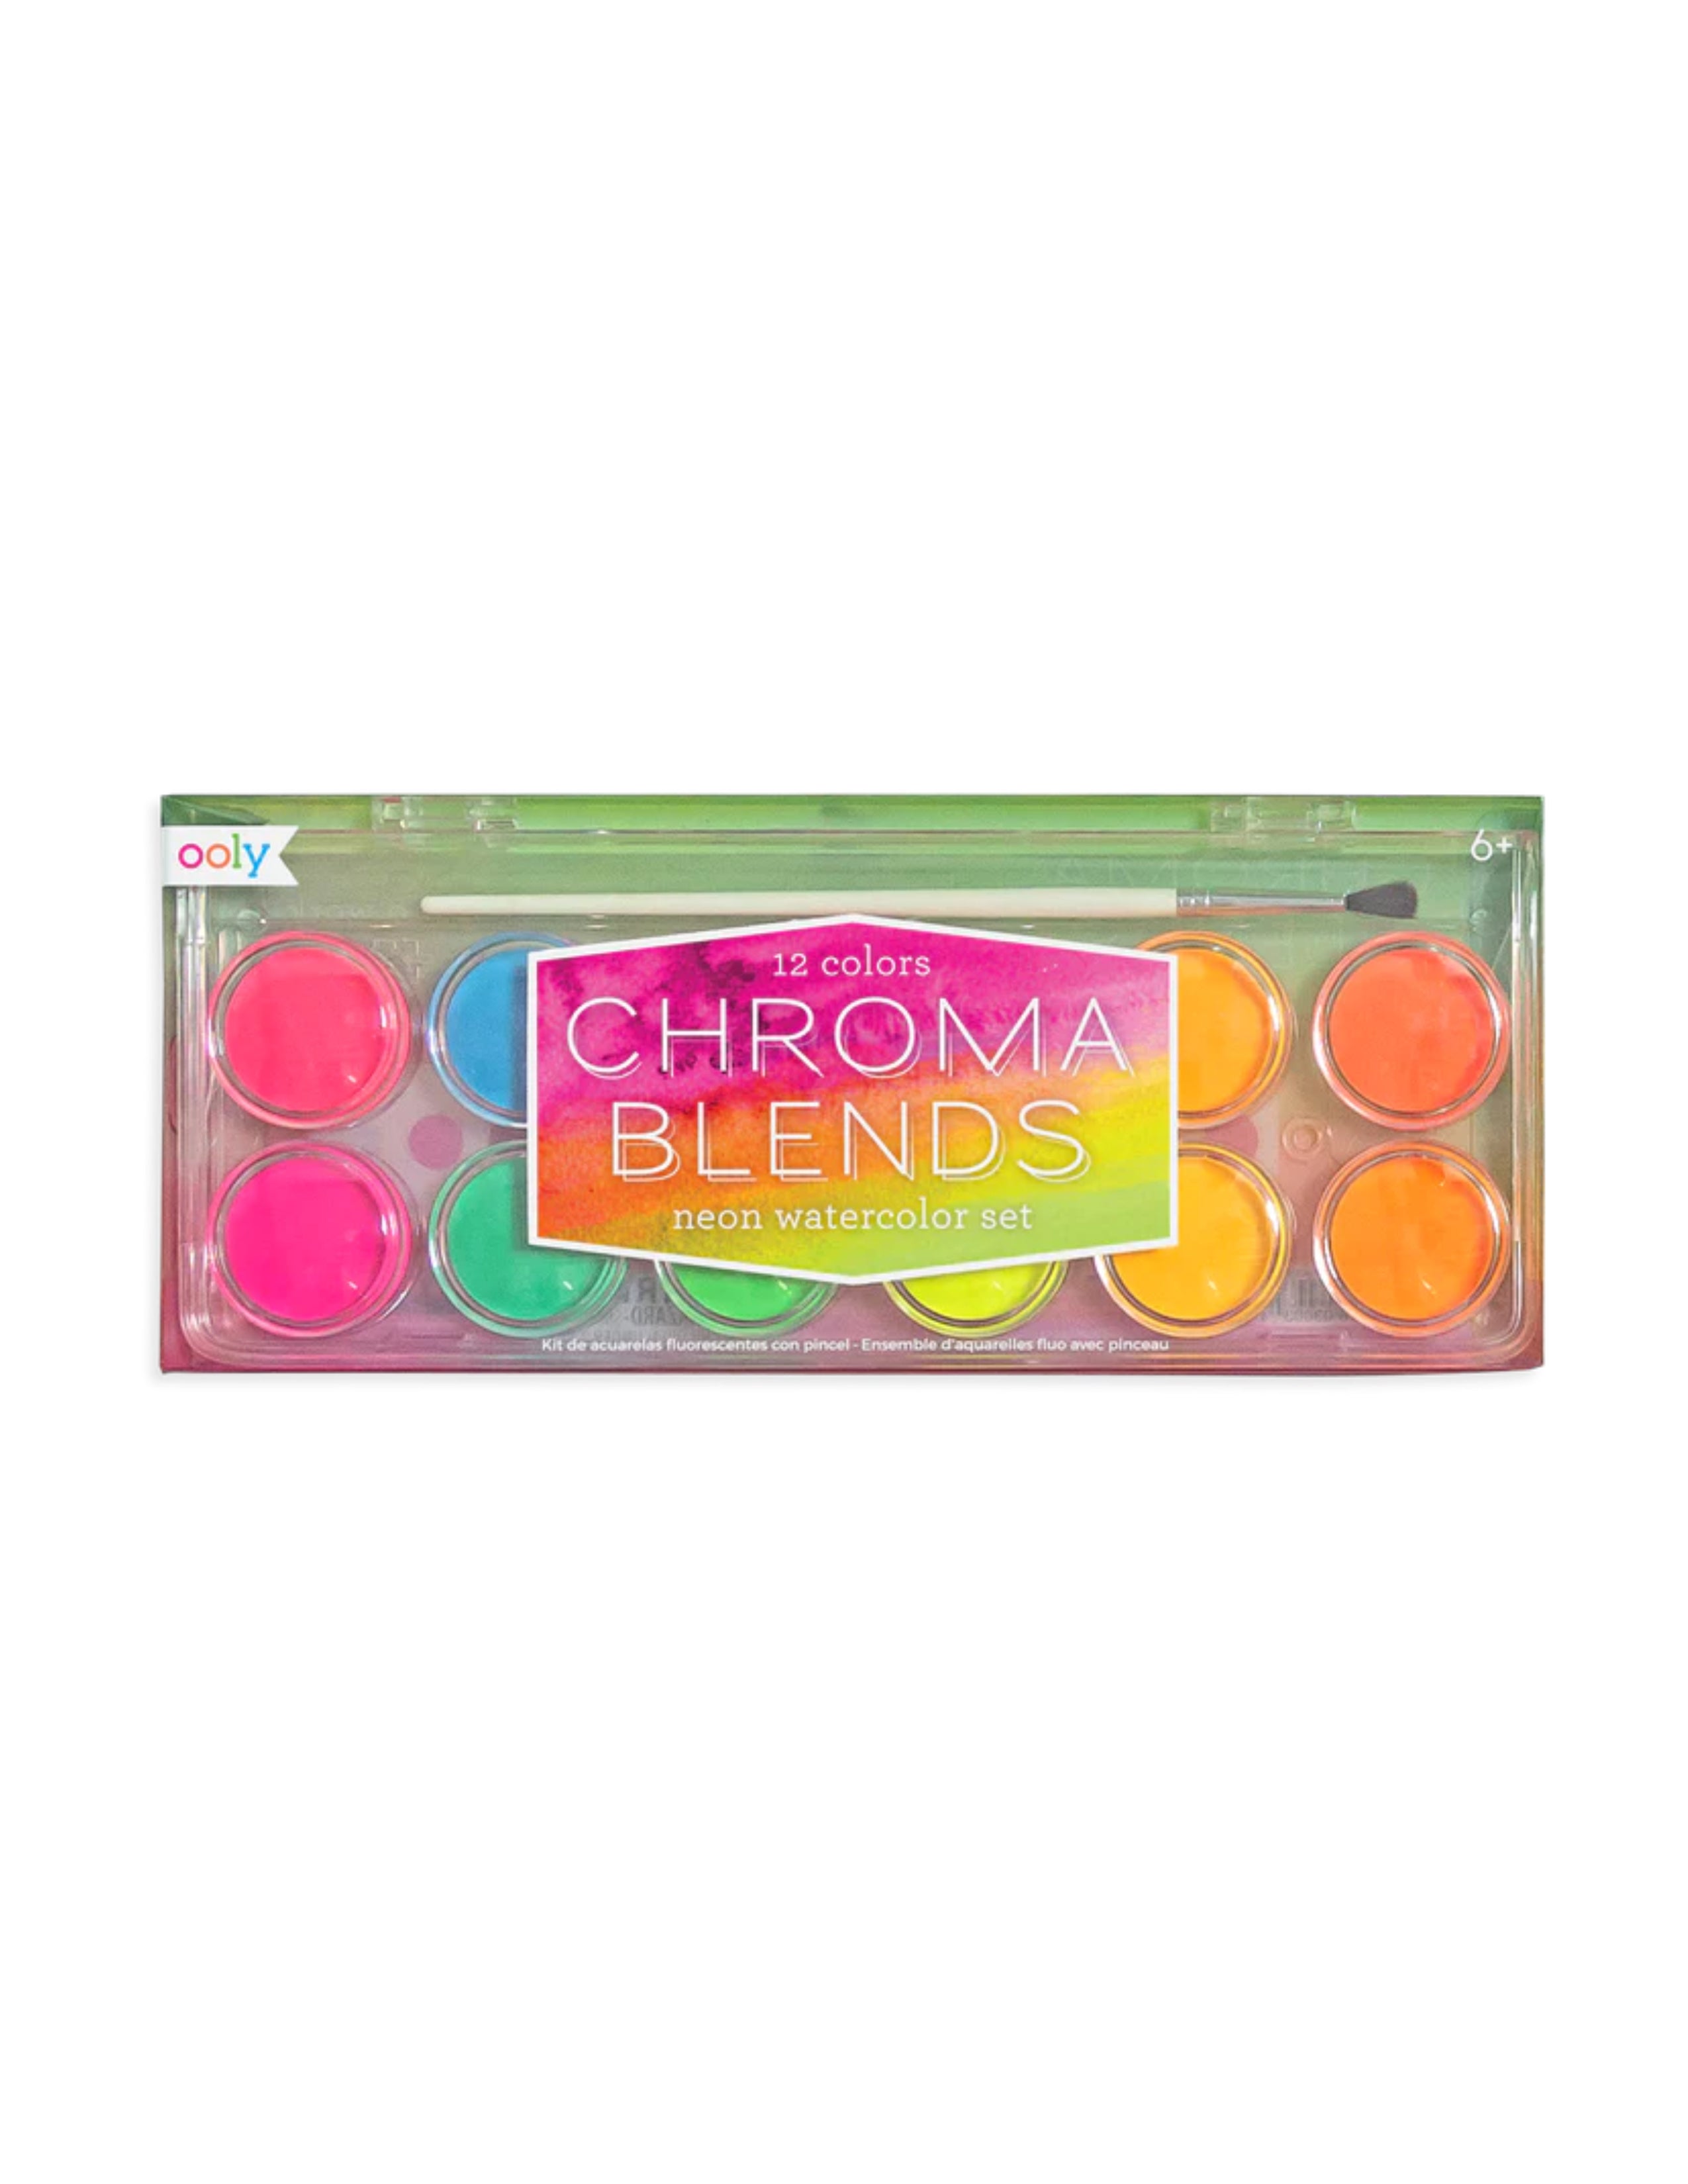 Chroma Blends Watercolors - Neon